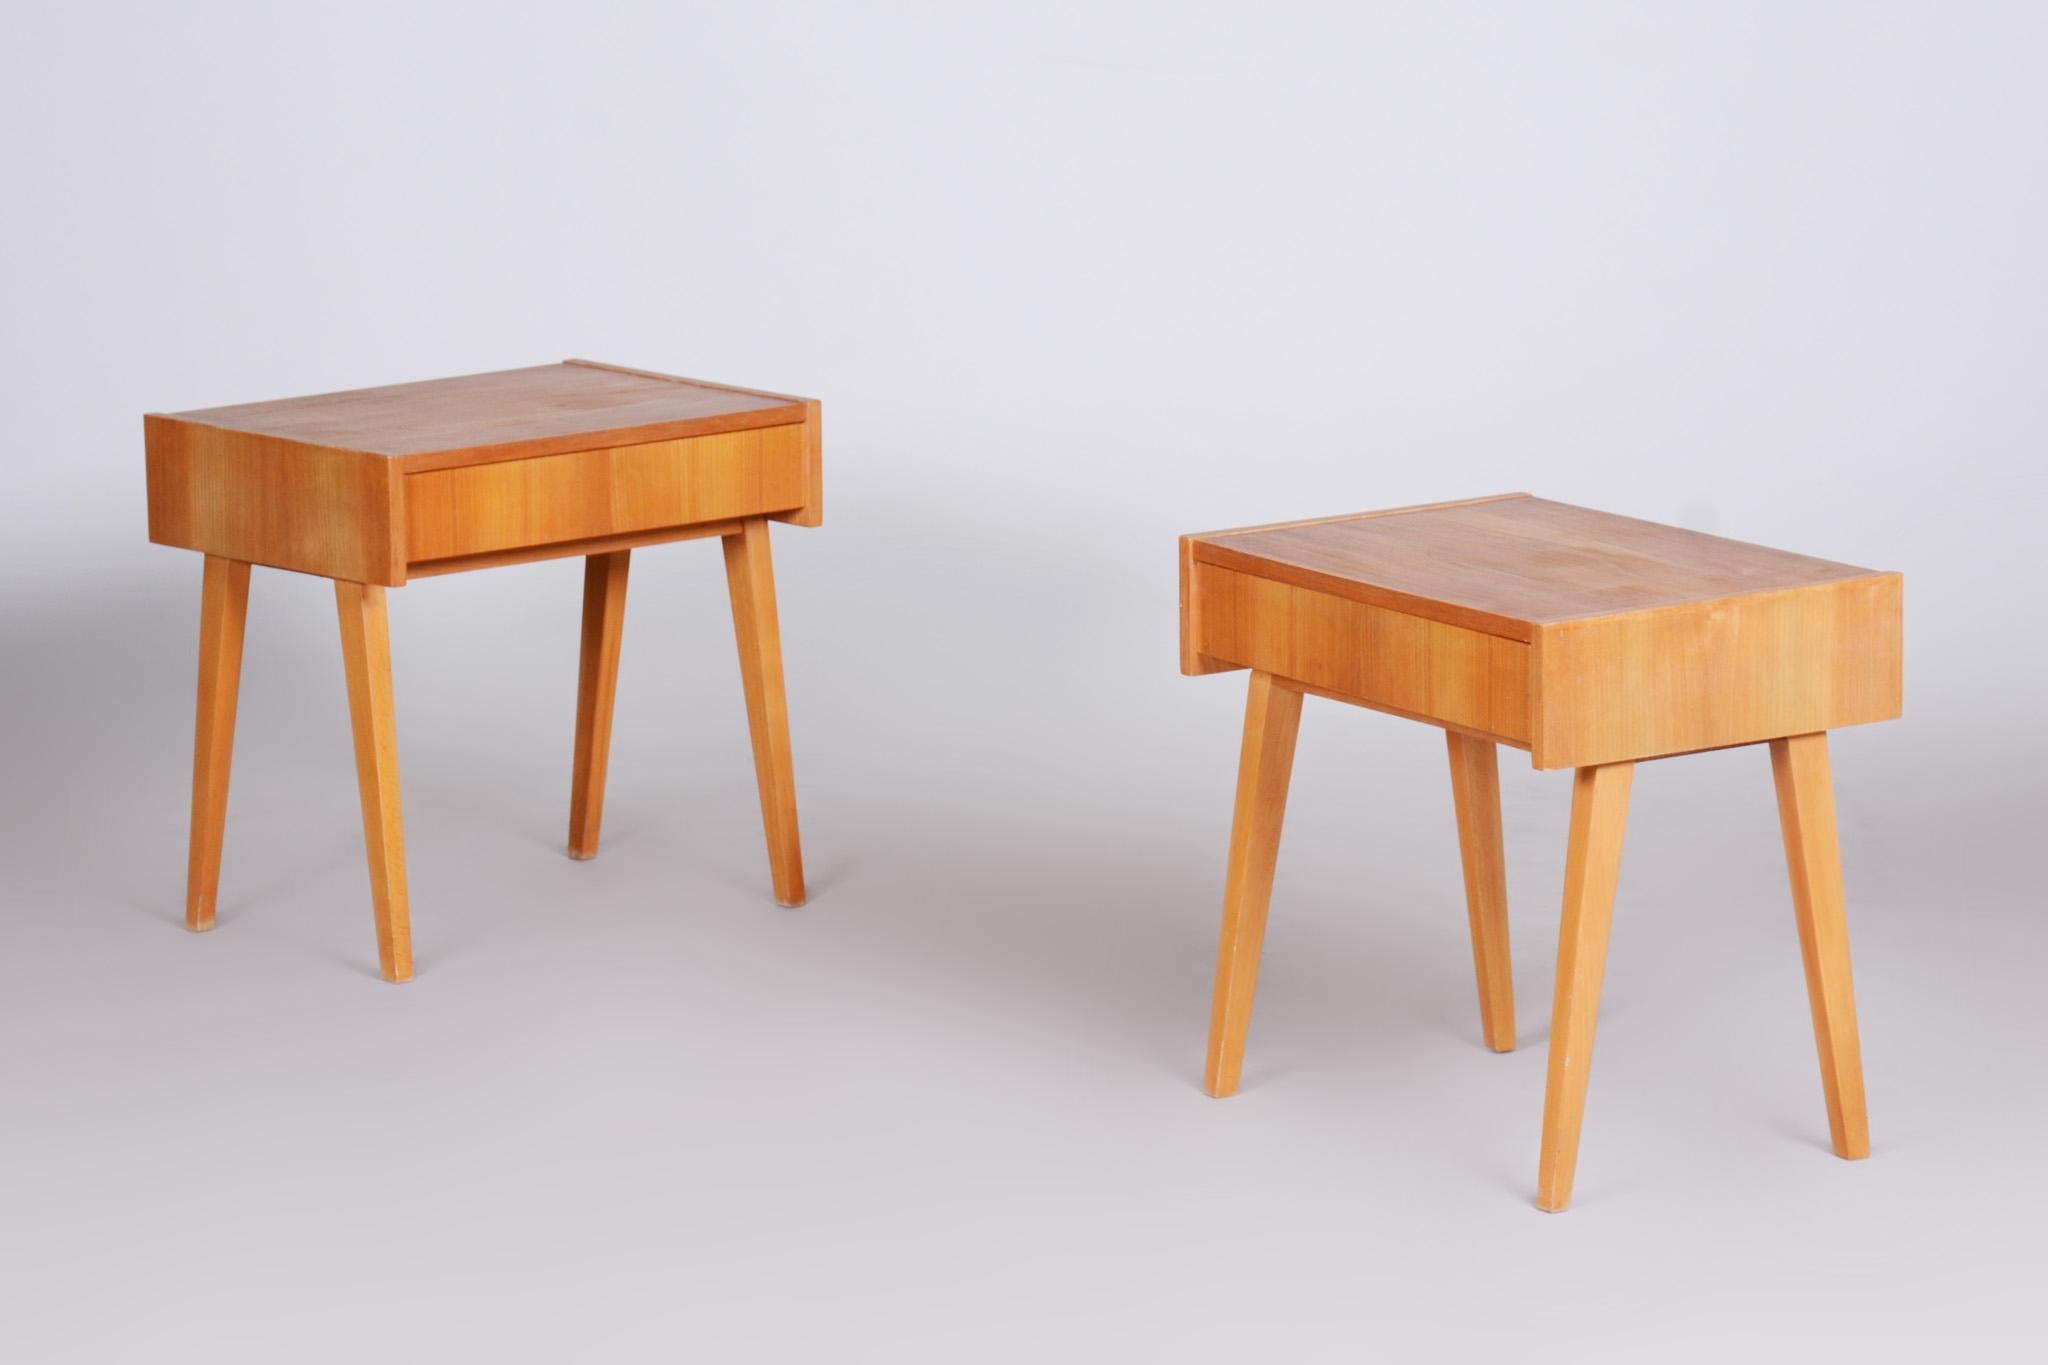 Pair of Ash Brown Midcentury Modeern Bedside Tables Made in Czechia, 1950s 3